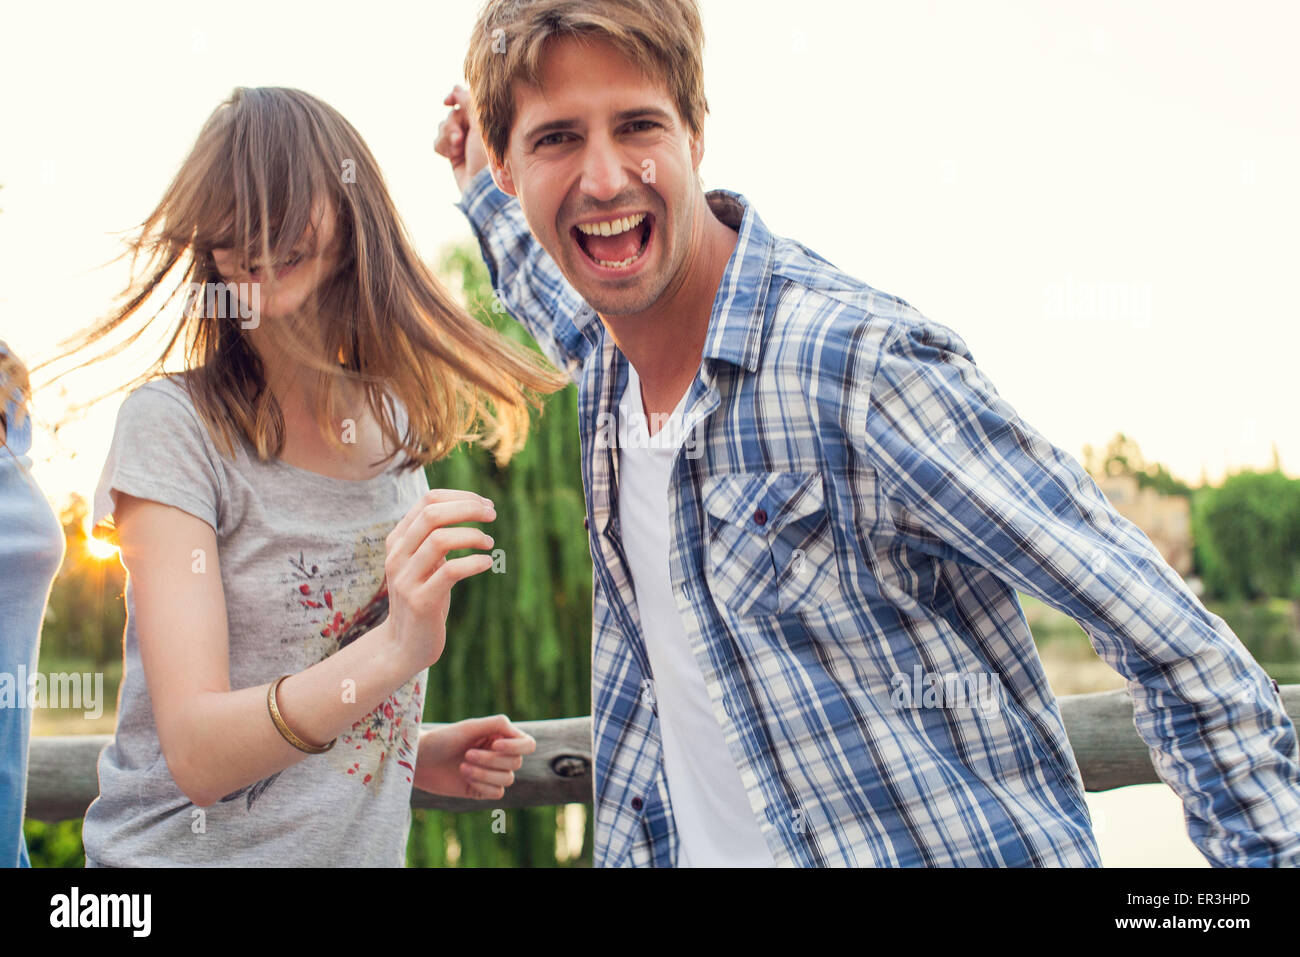 College friends partying outdoors Stock Photo